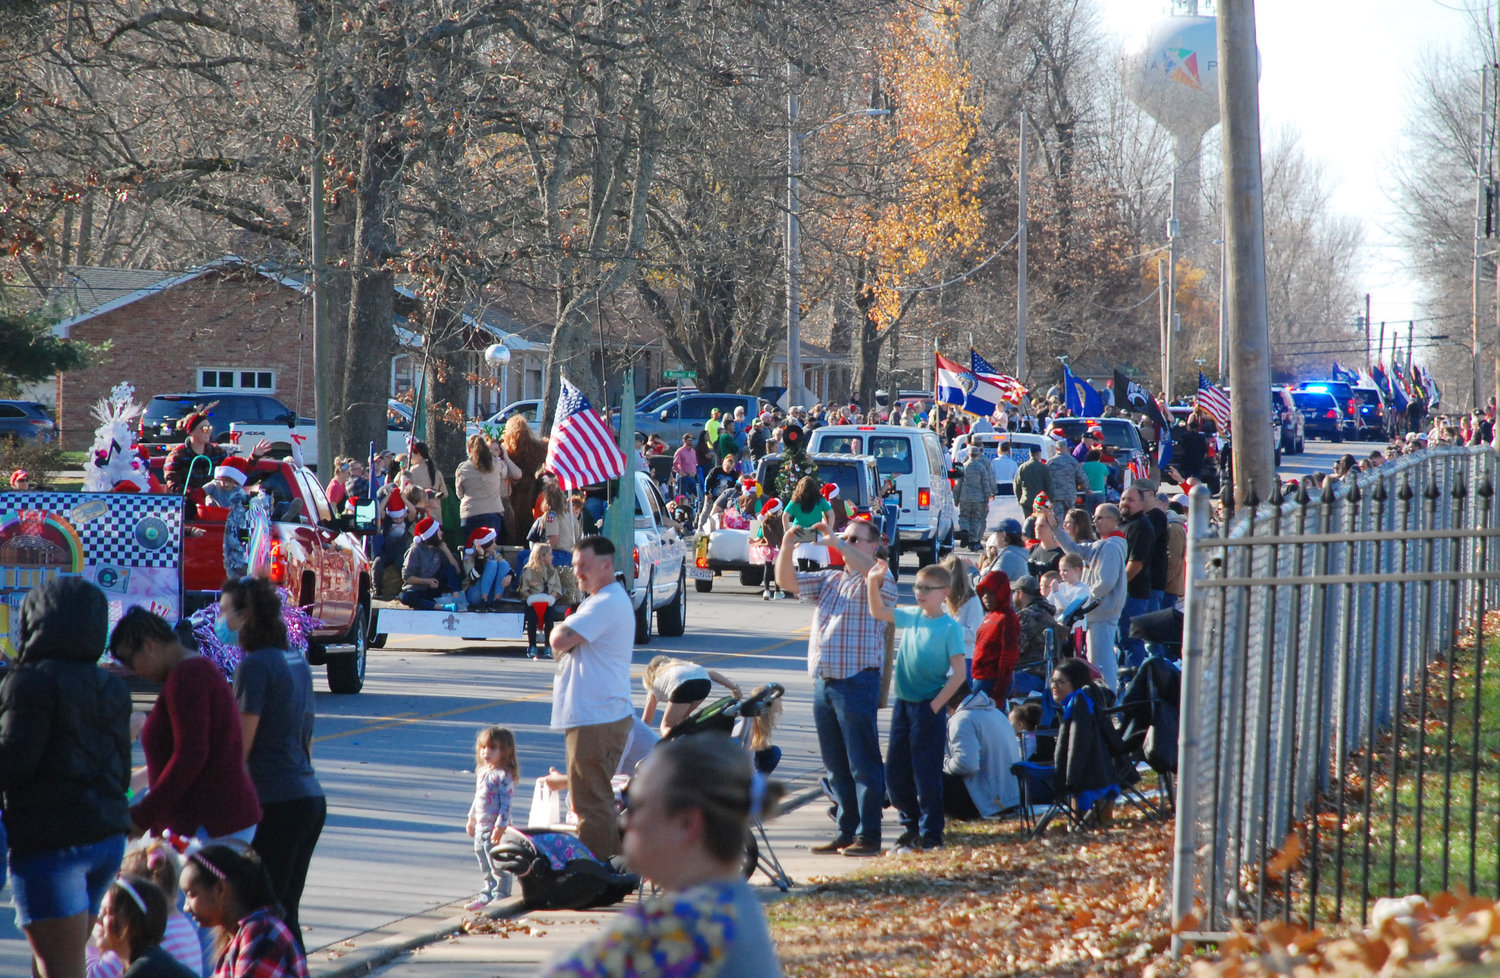 THOUSANDS OF PEOPLE lined the streets of Nixa as temperatures reached 70 degrees at the 2021 Nixa Christmas Parade. The route began on North Street.